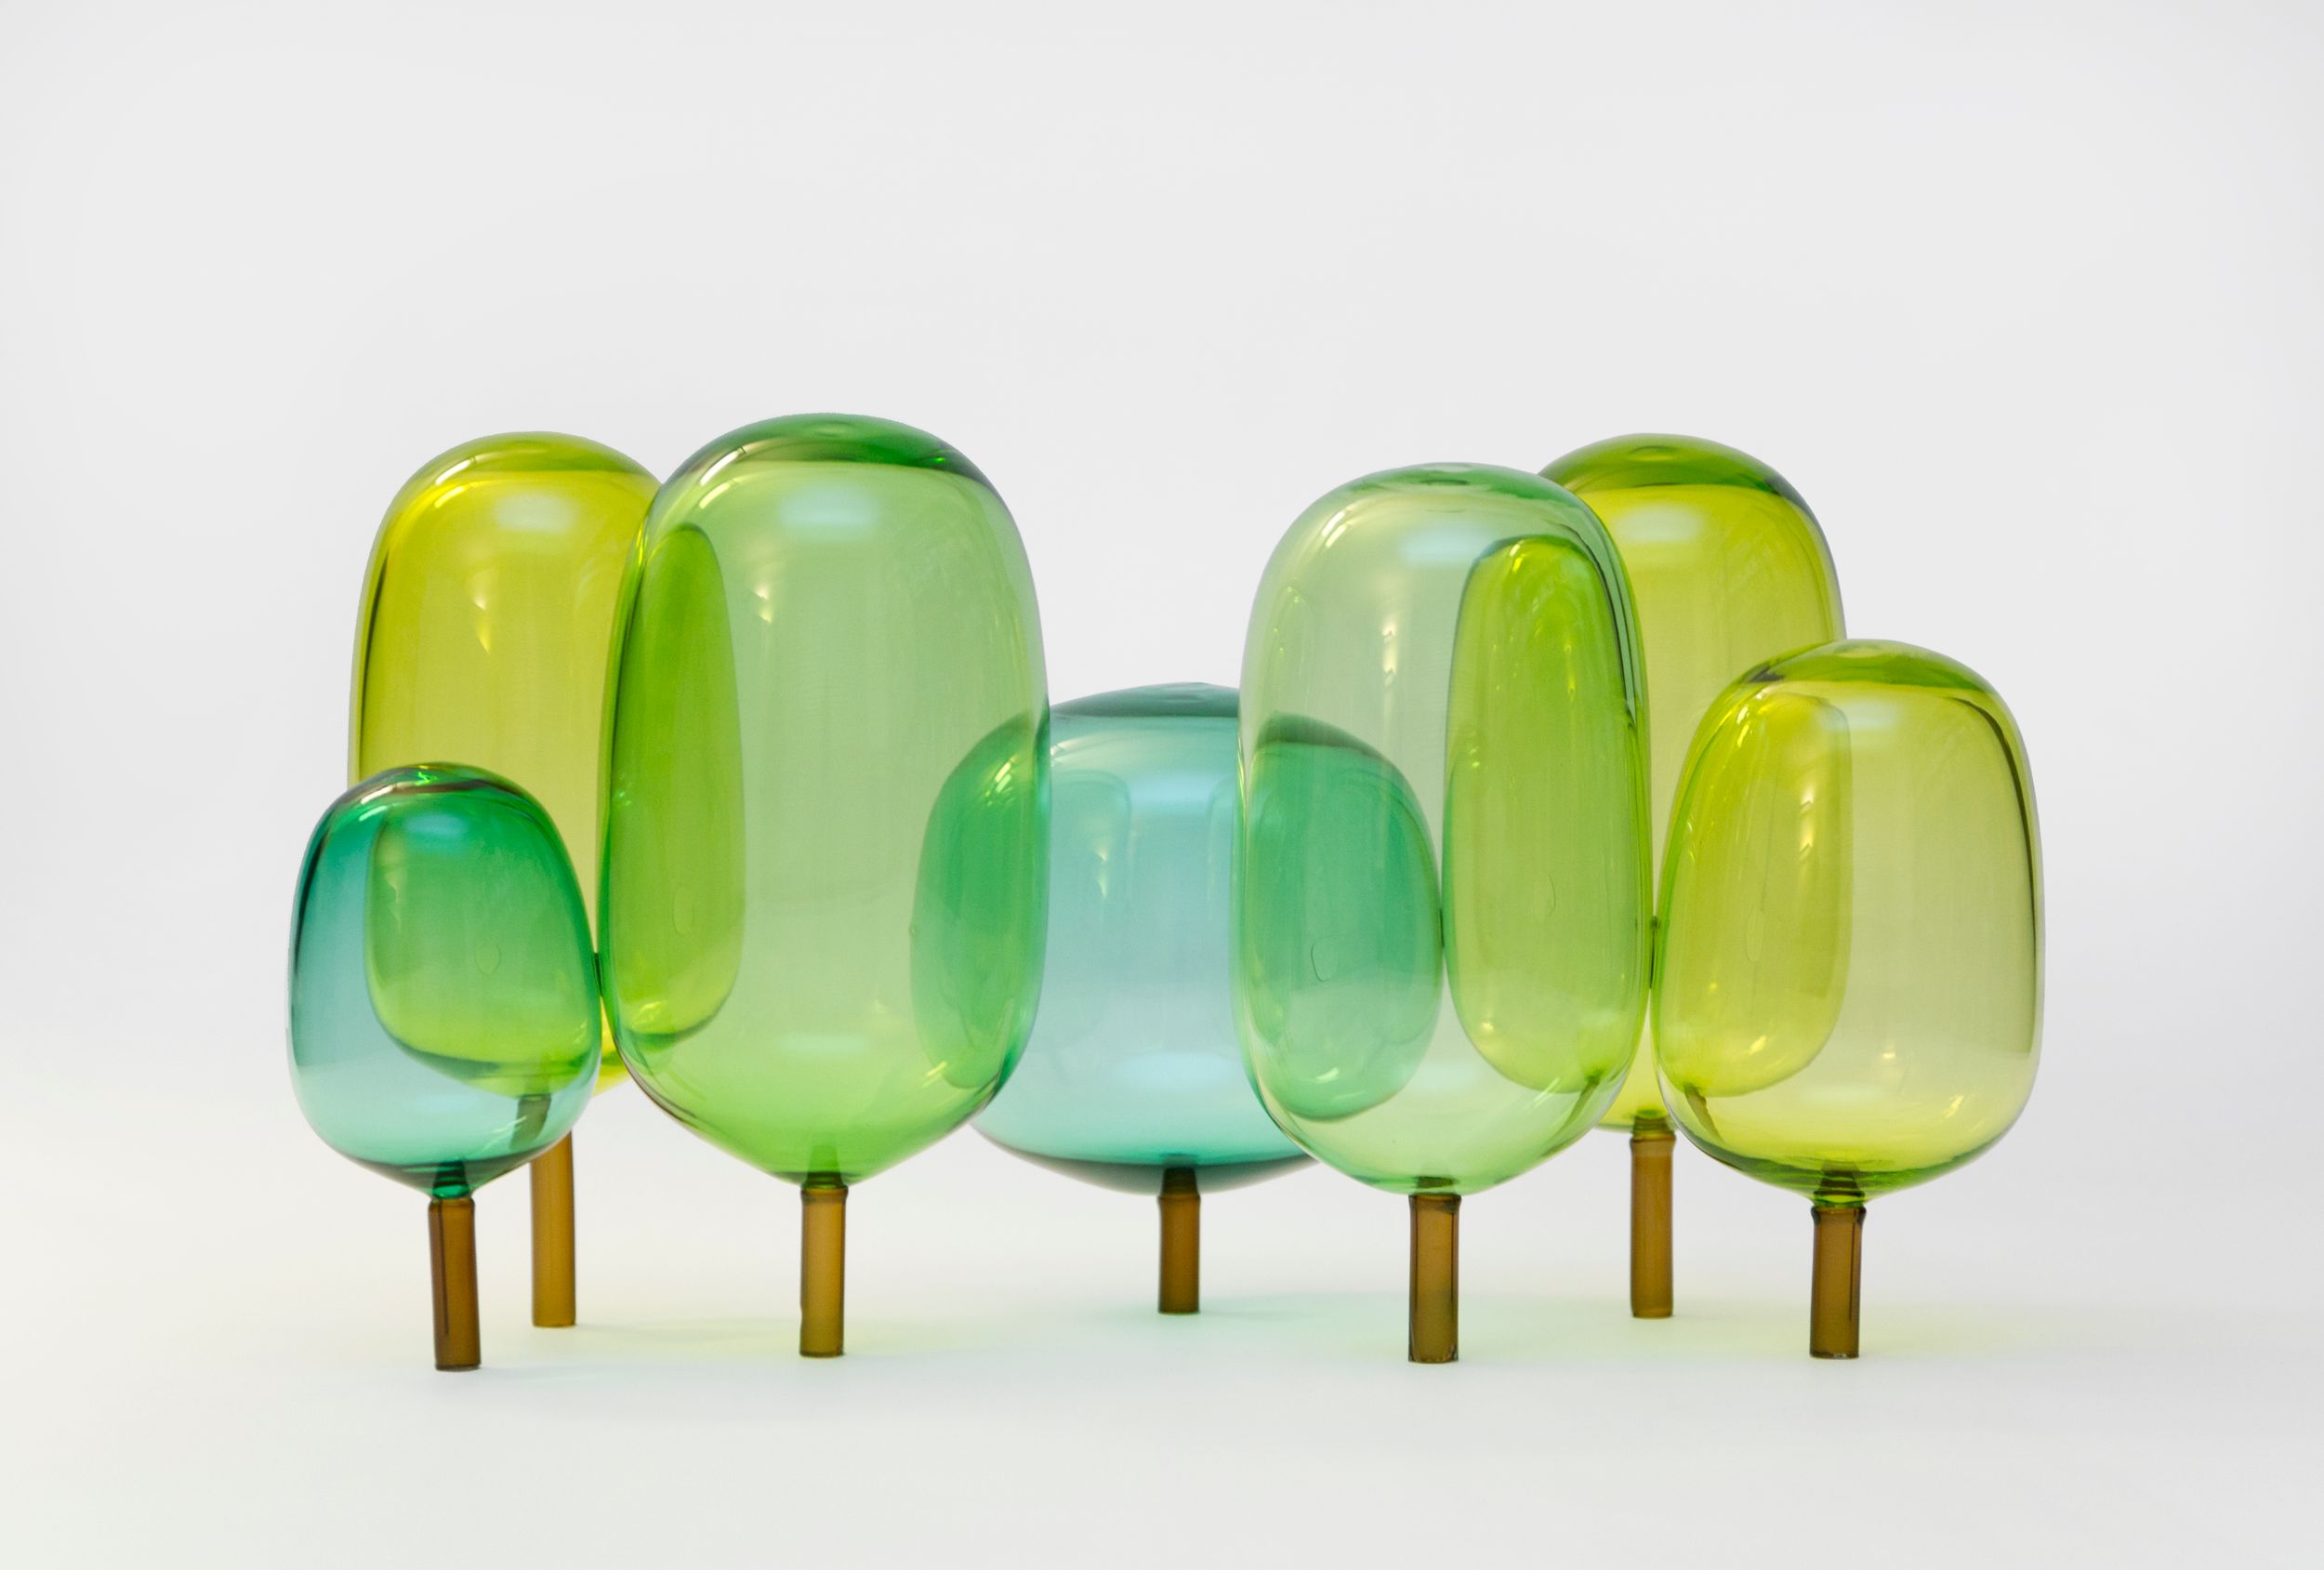 The woods designed by Jonas Stokke, Øystein Austad and Andreas Engesvik, blue and green glass sculptures, mouth blown